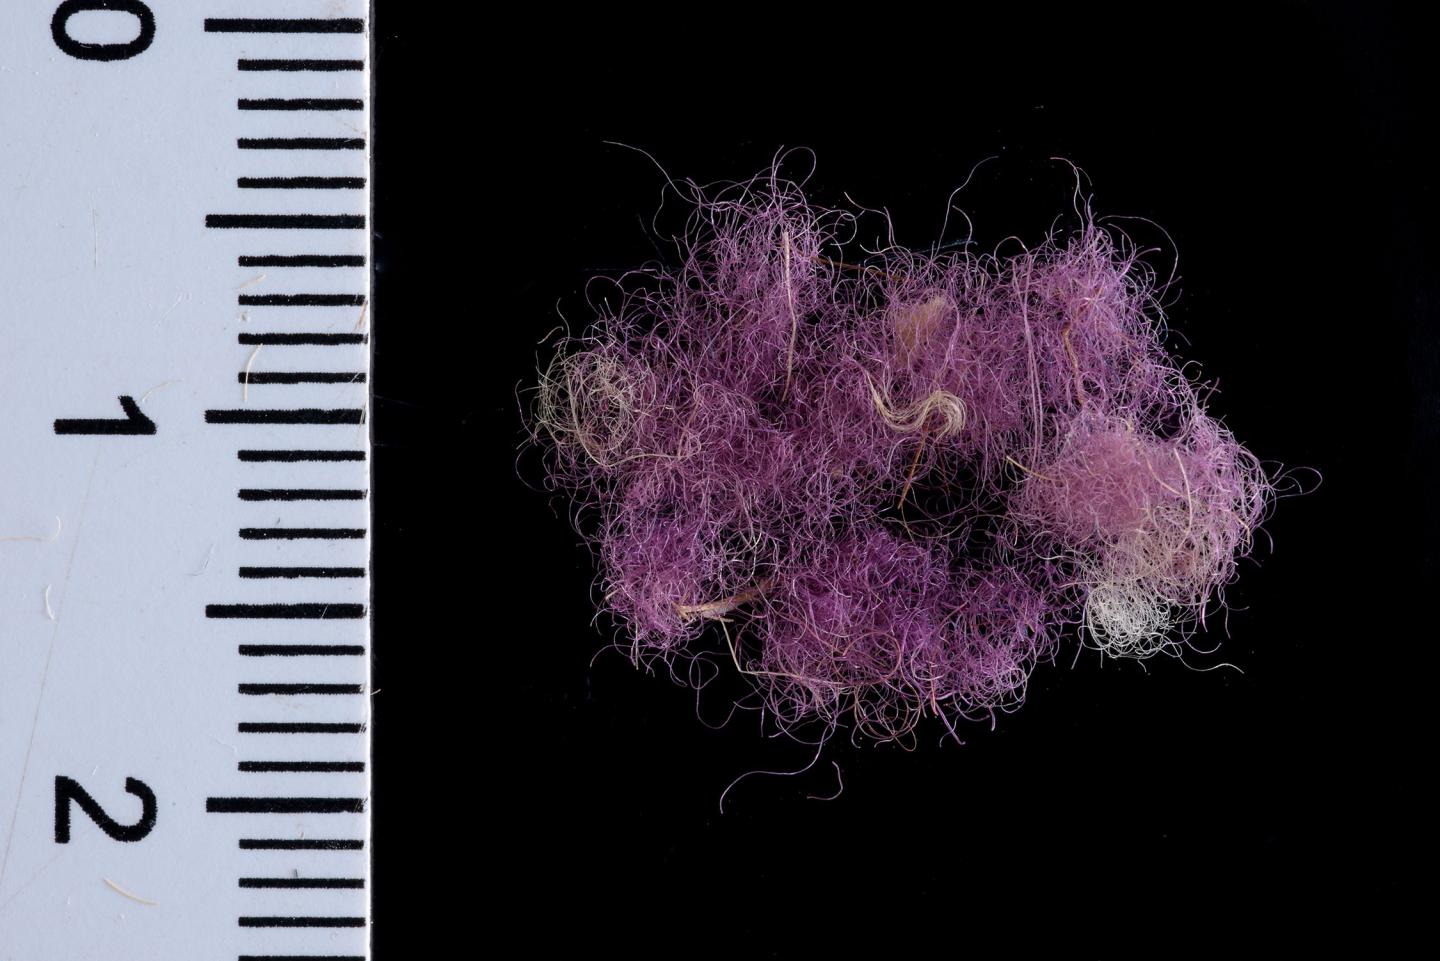 Wool fibers dyed with Royal Purple,~1000 BCE, Timna Valley, Israel.